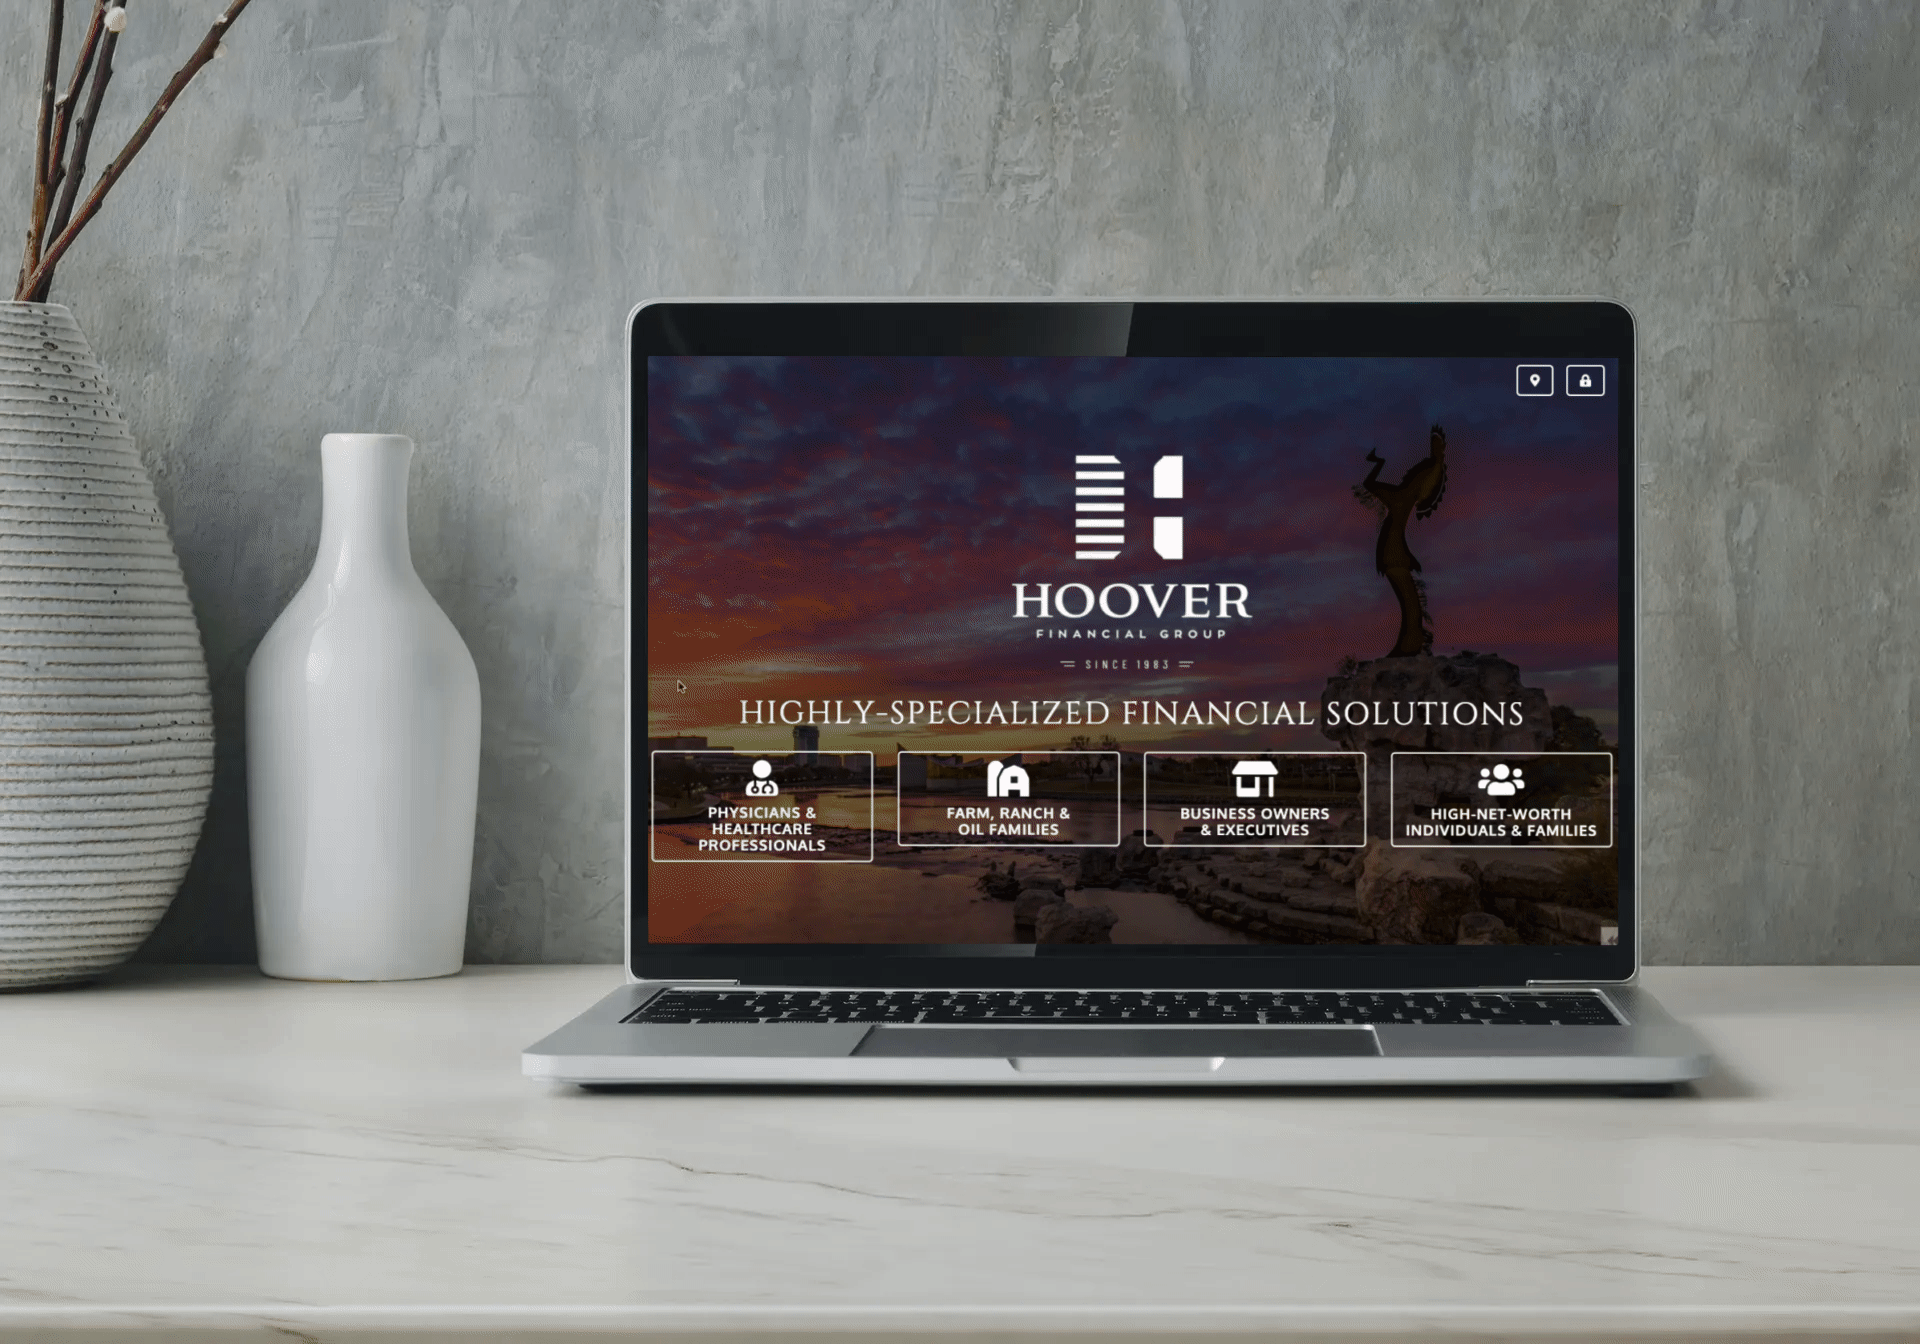 The homepage animation of Hoover's website allows a user to self-identify with the type of client they are, including some 